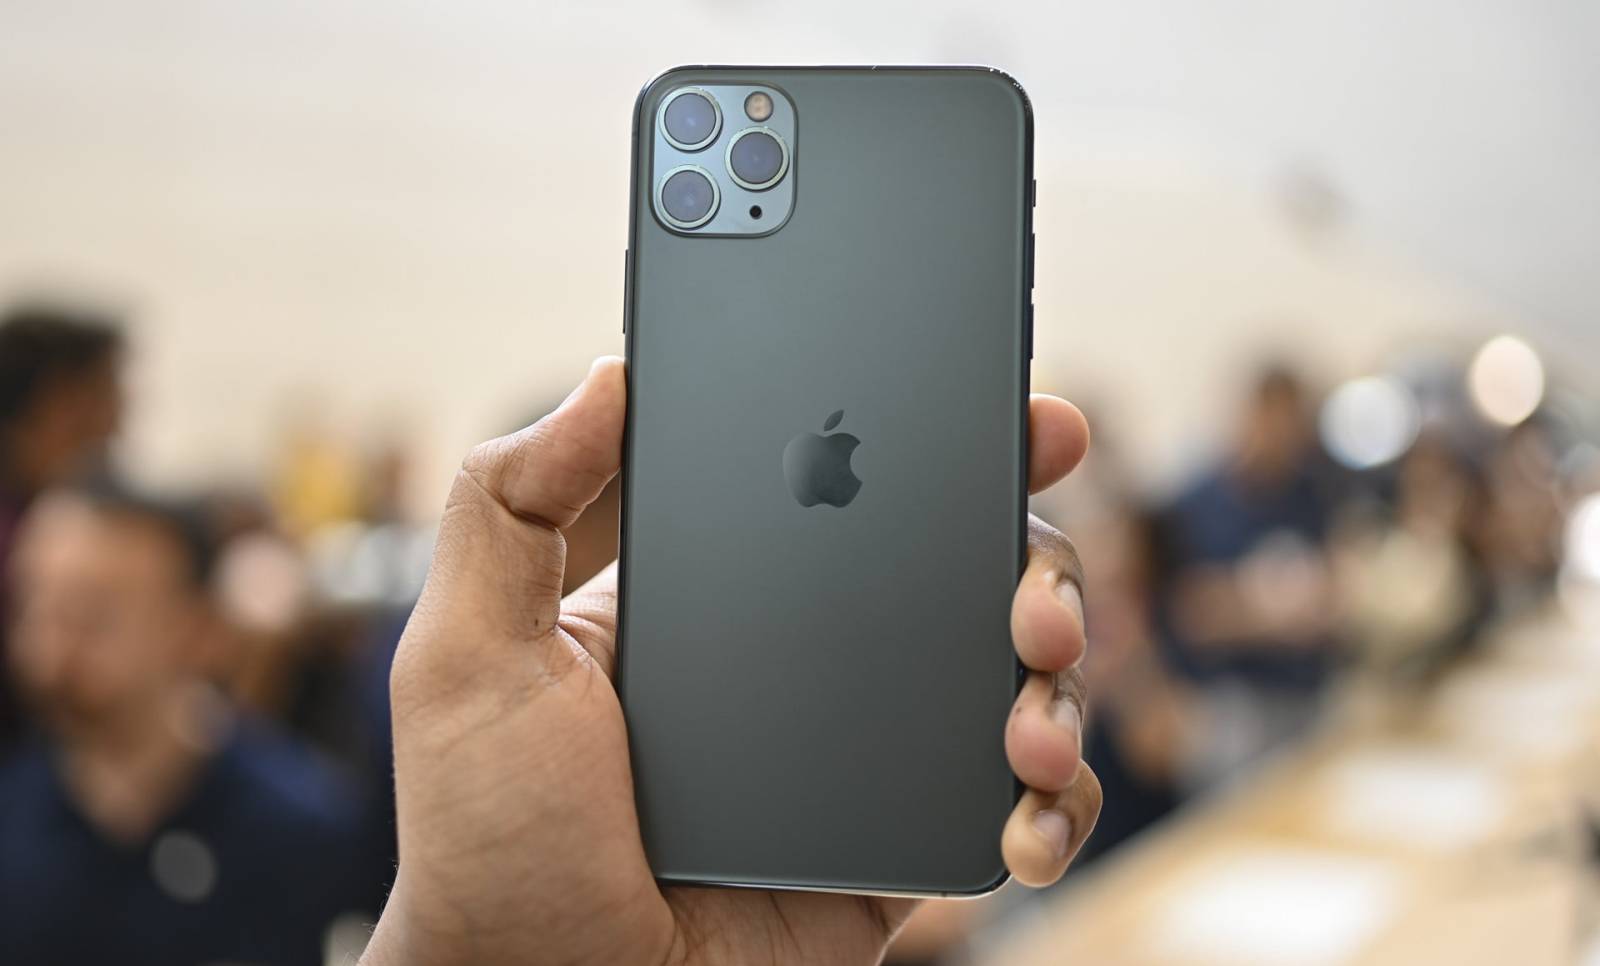 Apple Registers Sales ABOVE EXPECTATIONS for the iPhone 11 Series